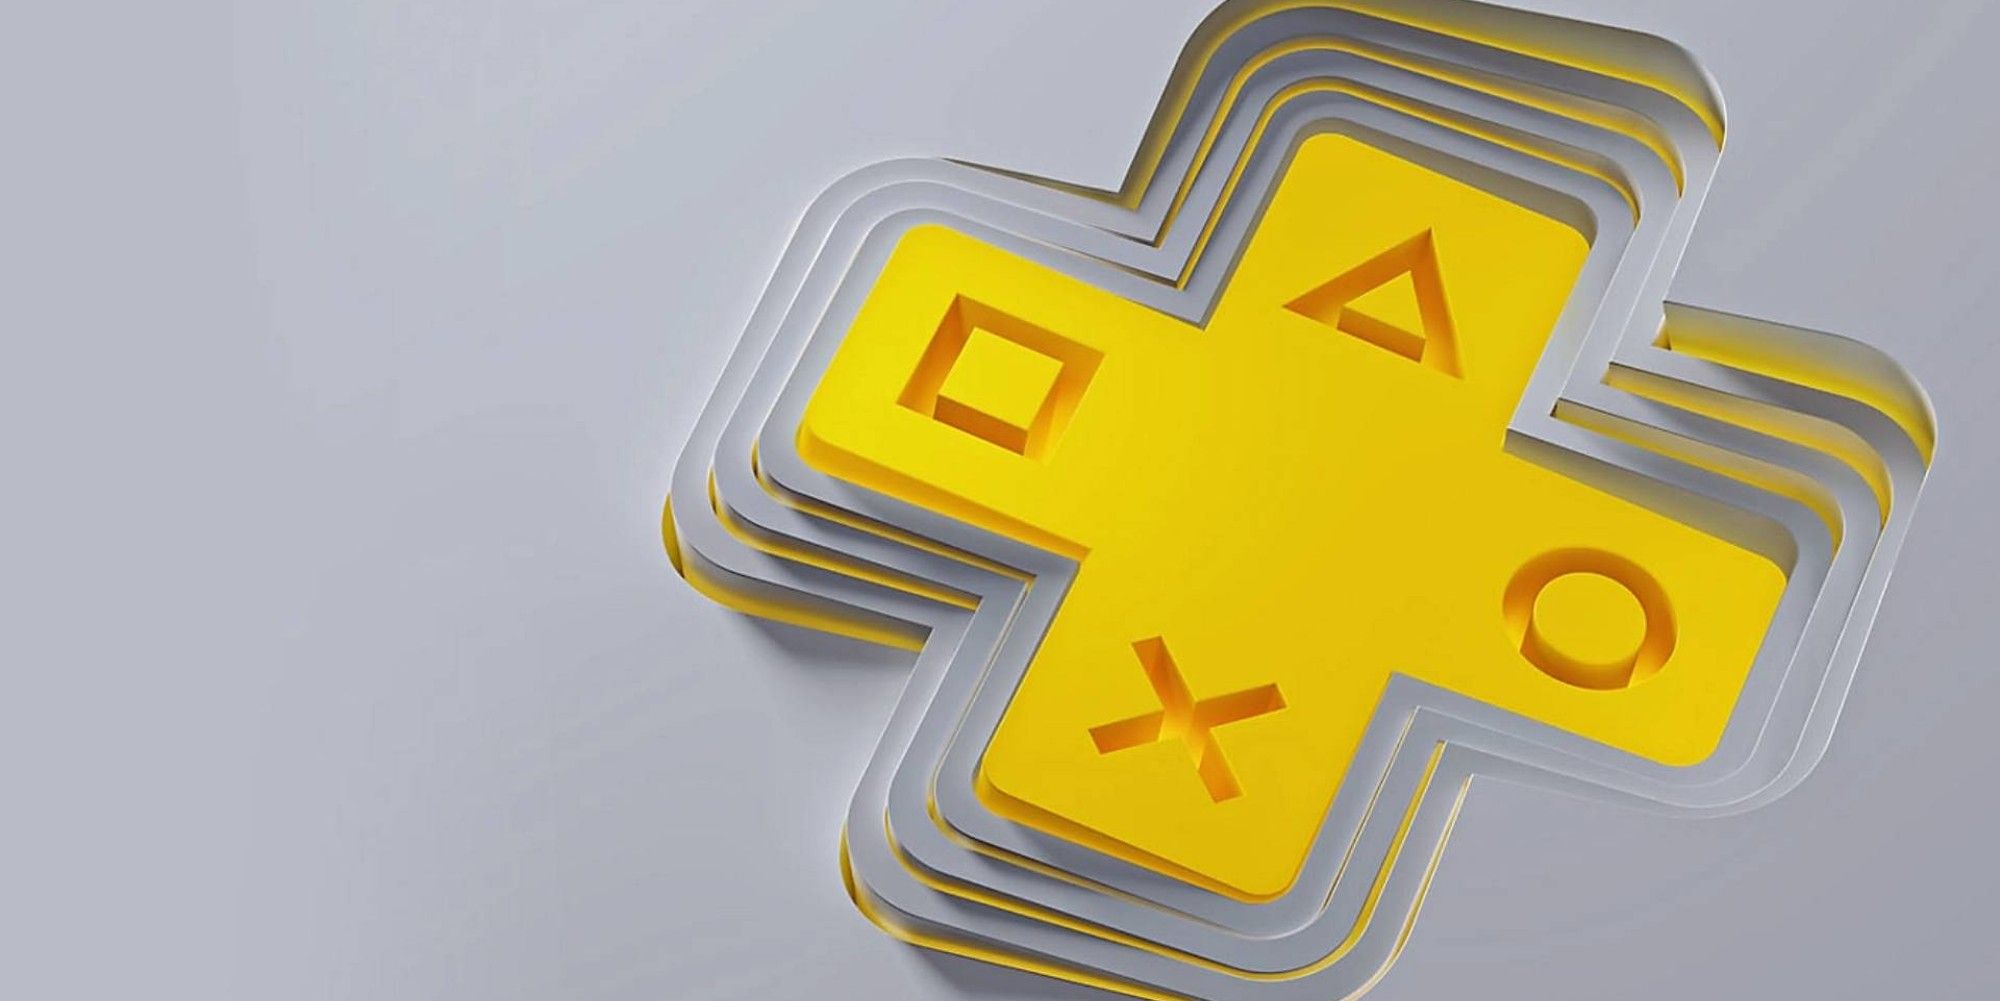 PlayStation Plus Black Friday Sale Slashes Subscription Prices by